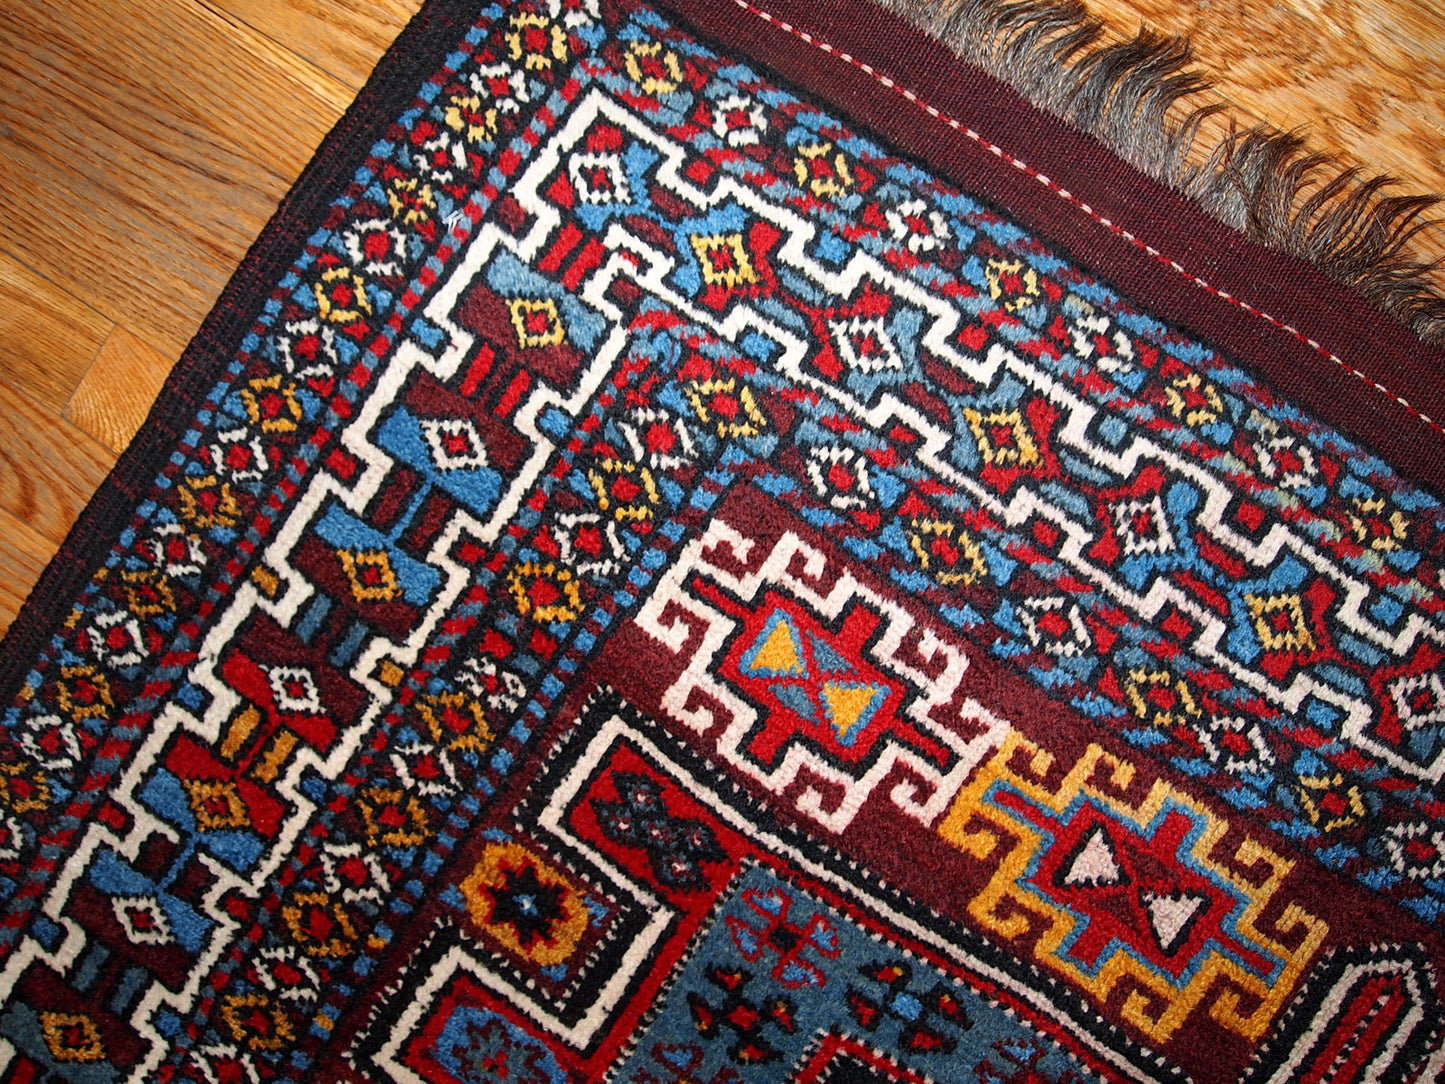 Antique Persian Kurdish rug in deep burgundy color with some golden, white and sky blue shades. This rug is in original good condition.